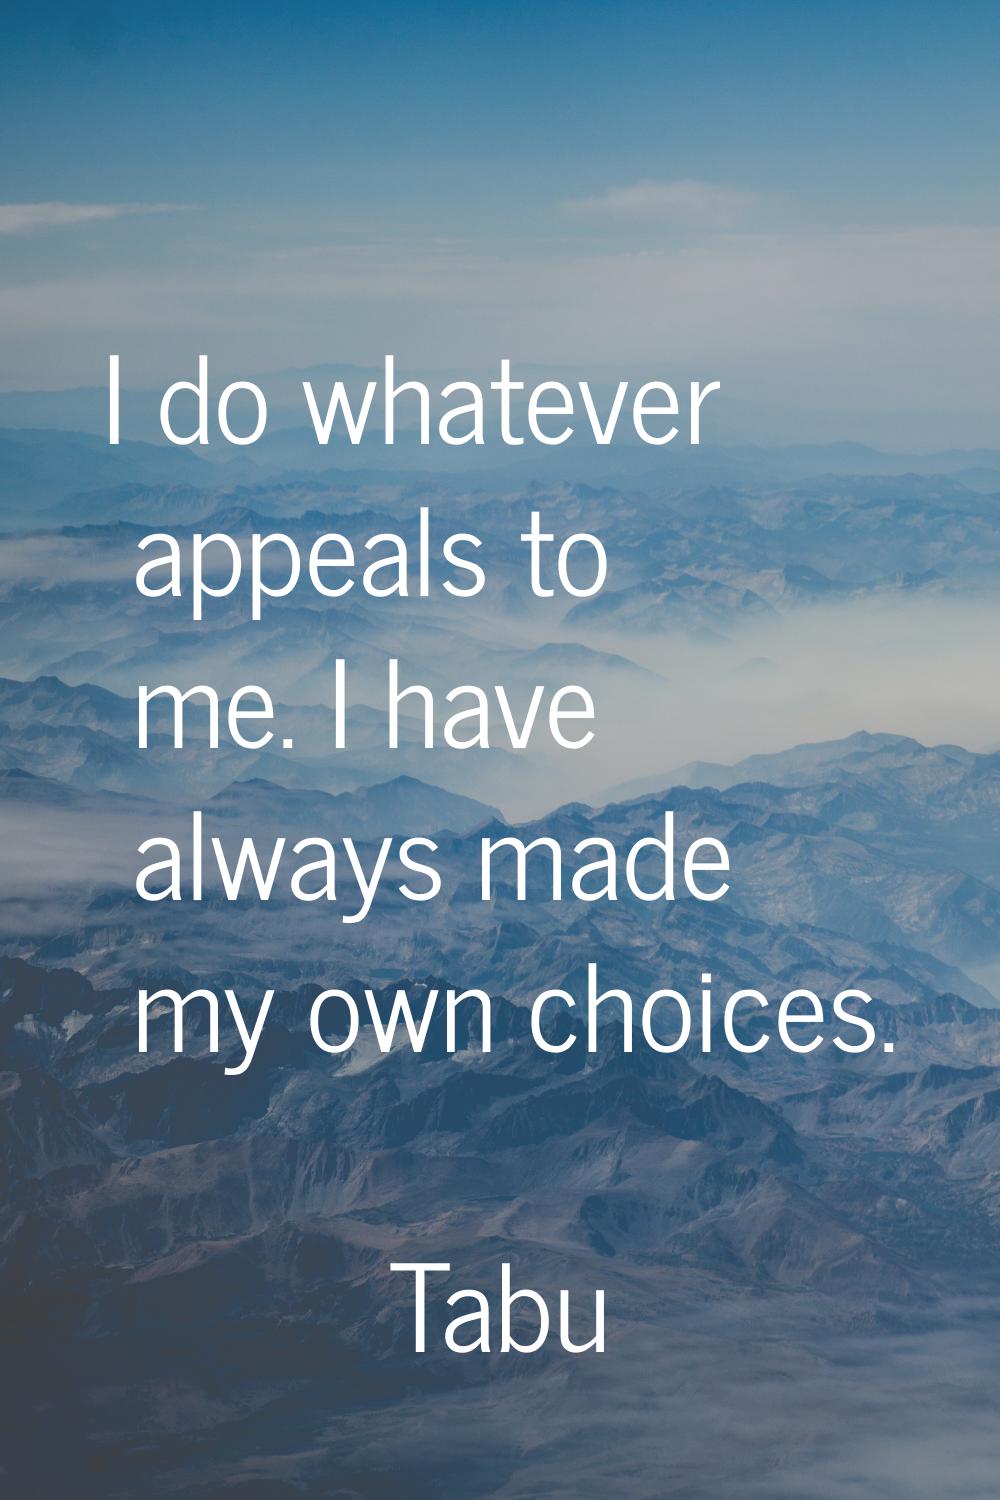 I do whatever appeals to me. I have always made my own choices.